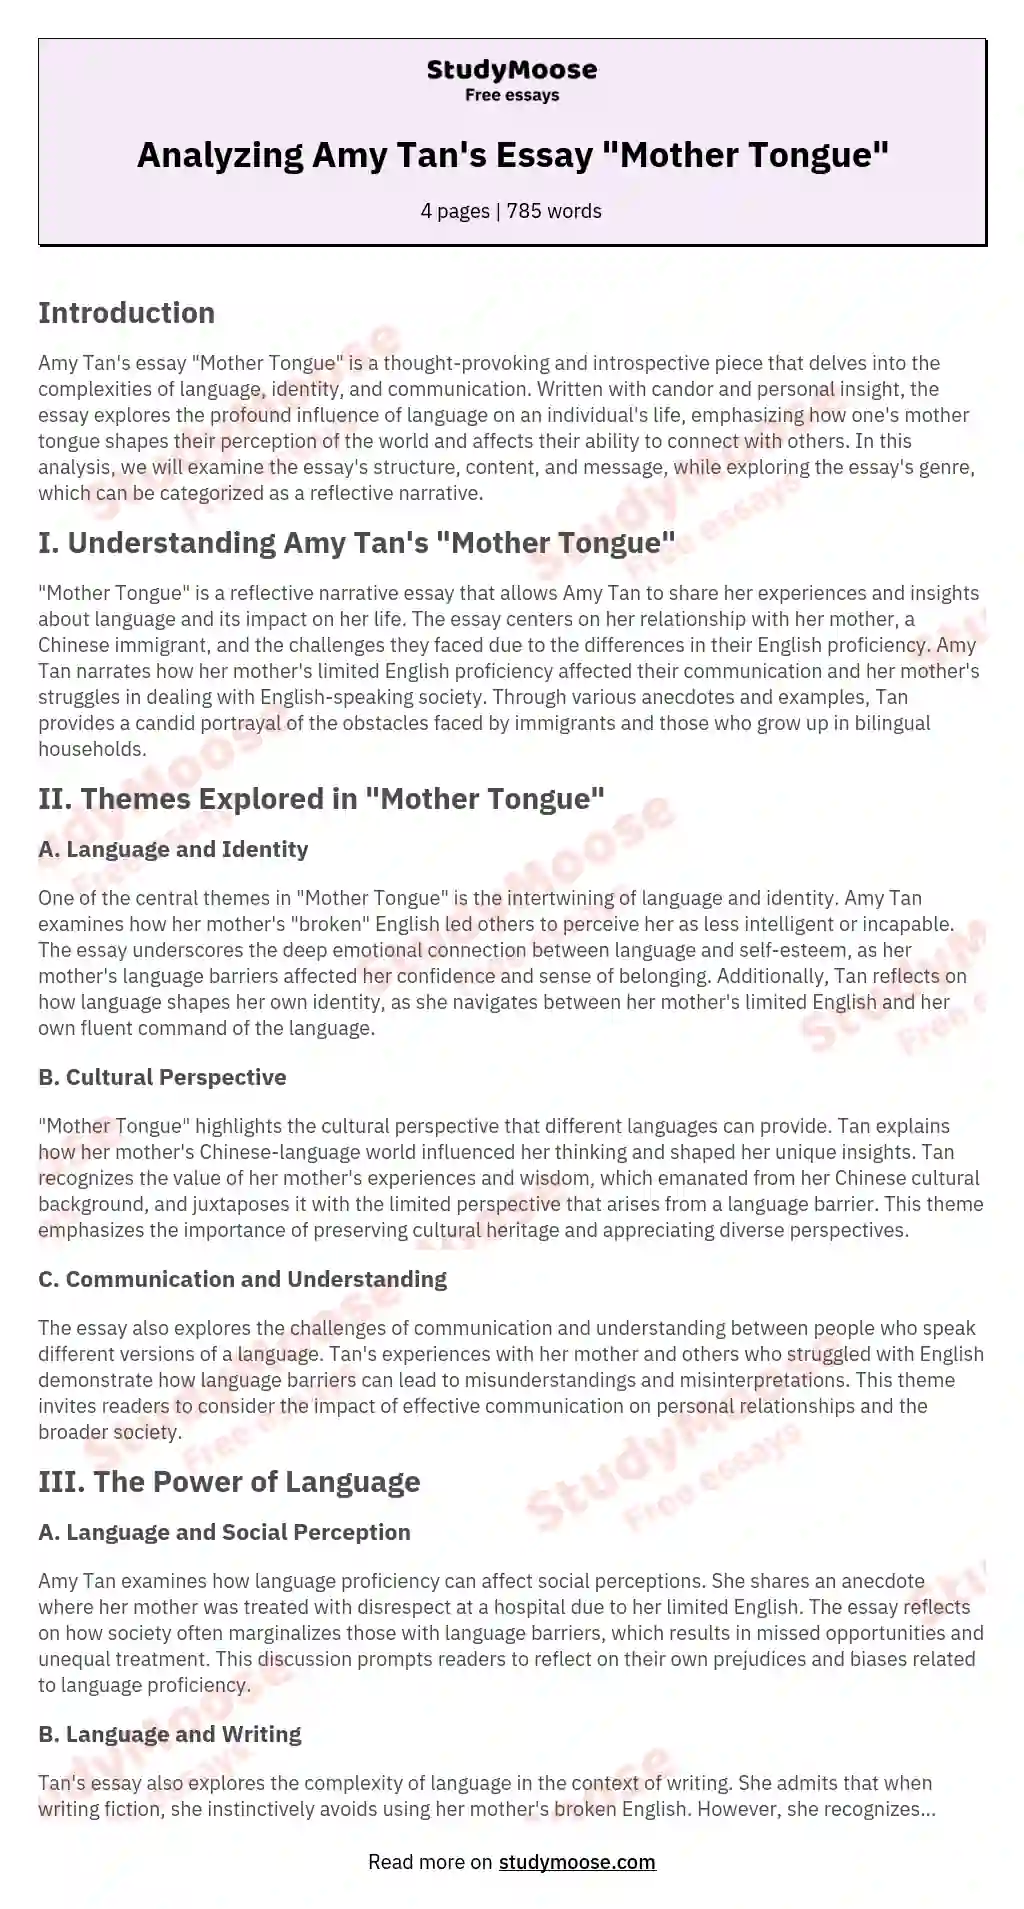 Analyzing Amy Tan's Essay "Mother Tongue" essay